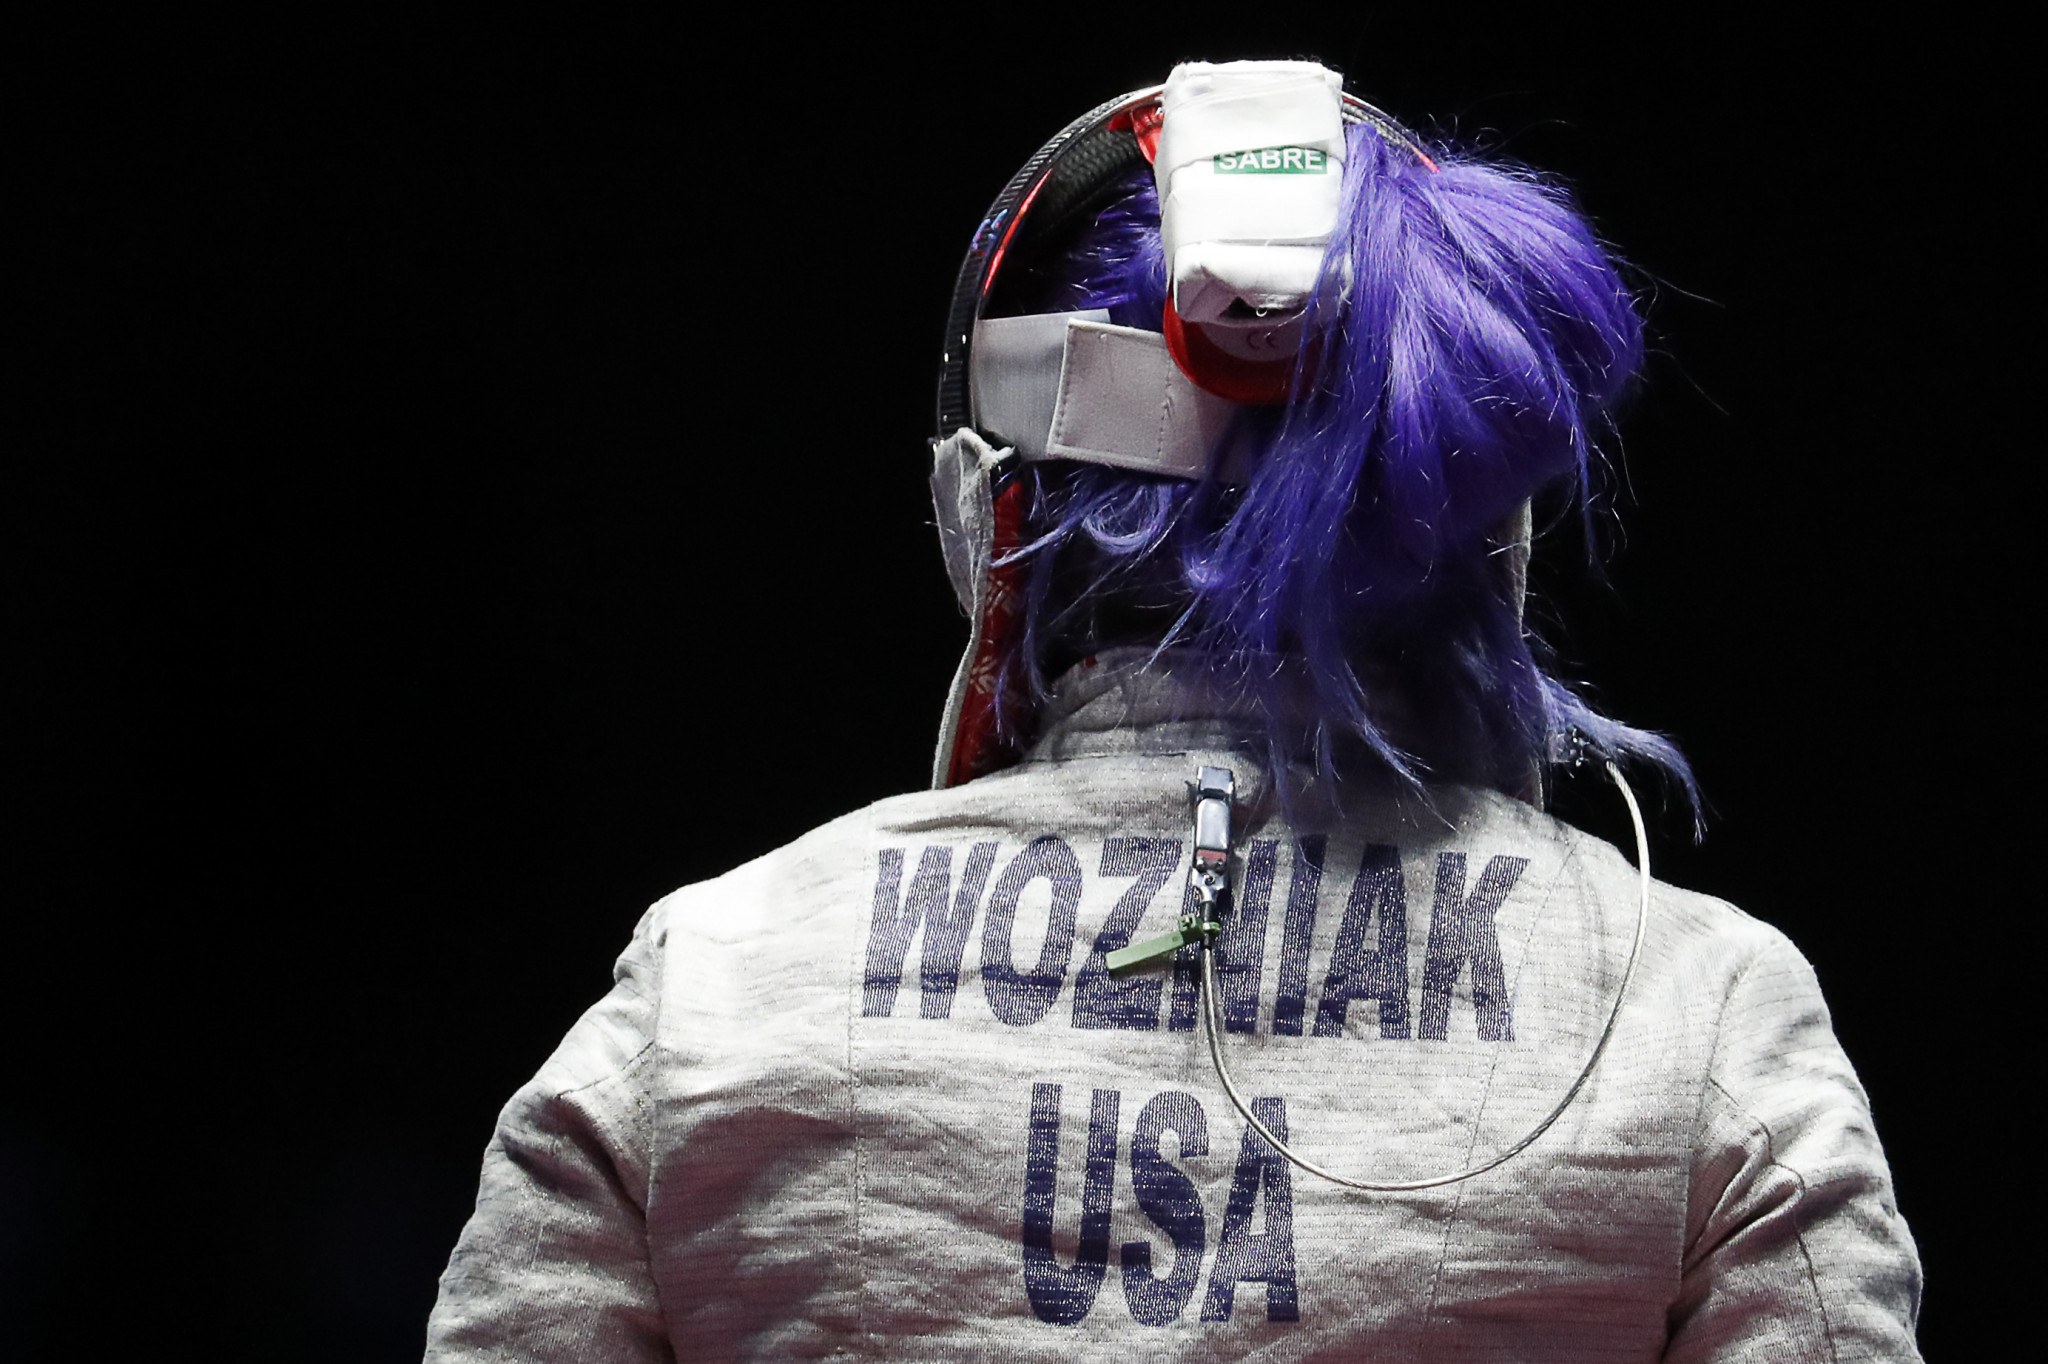 America's Dagmara Wozniak won the women's sabre competition at the Pan American Fencing Championships in Havana ©Getty Images